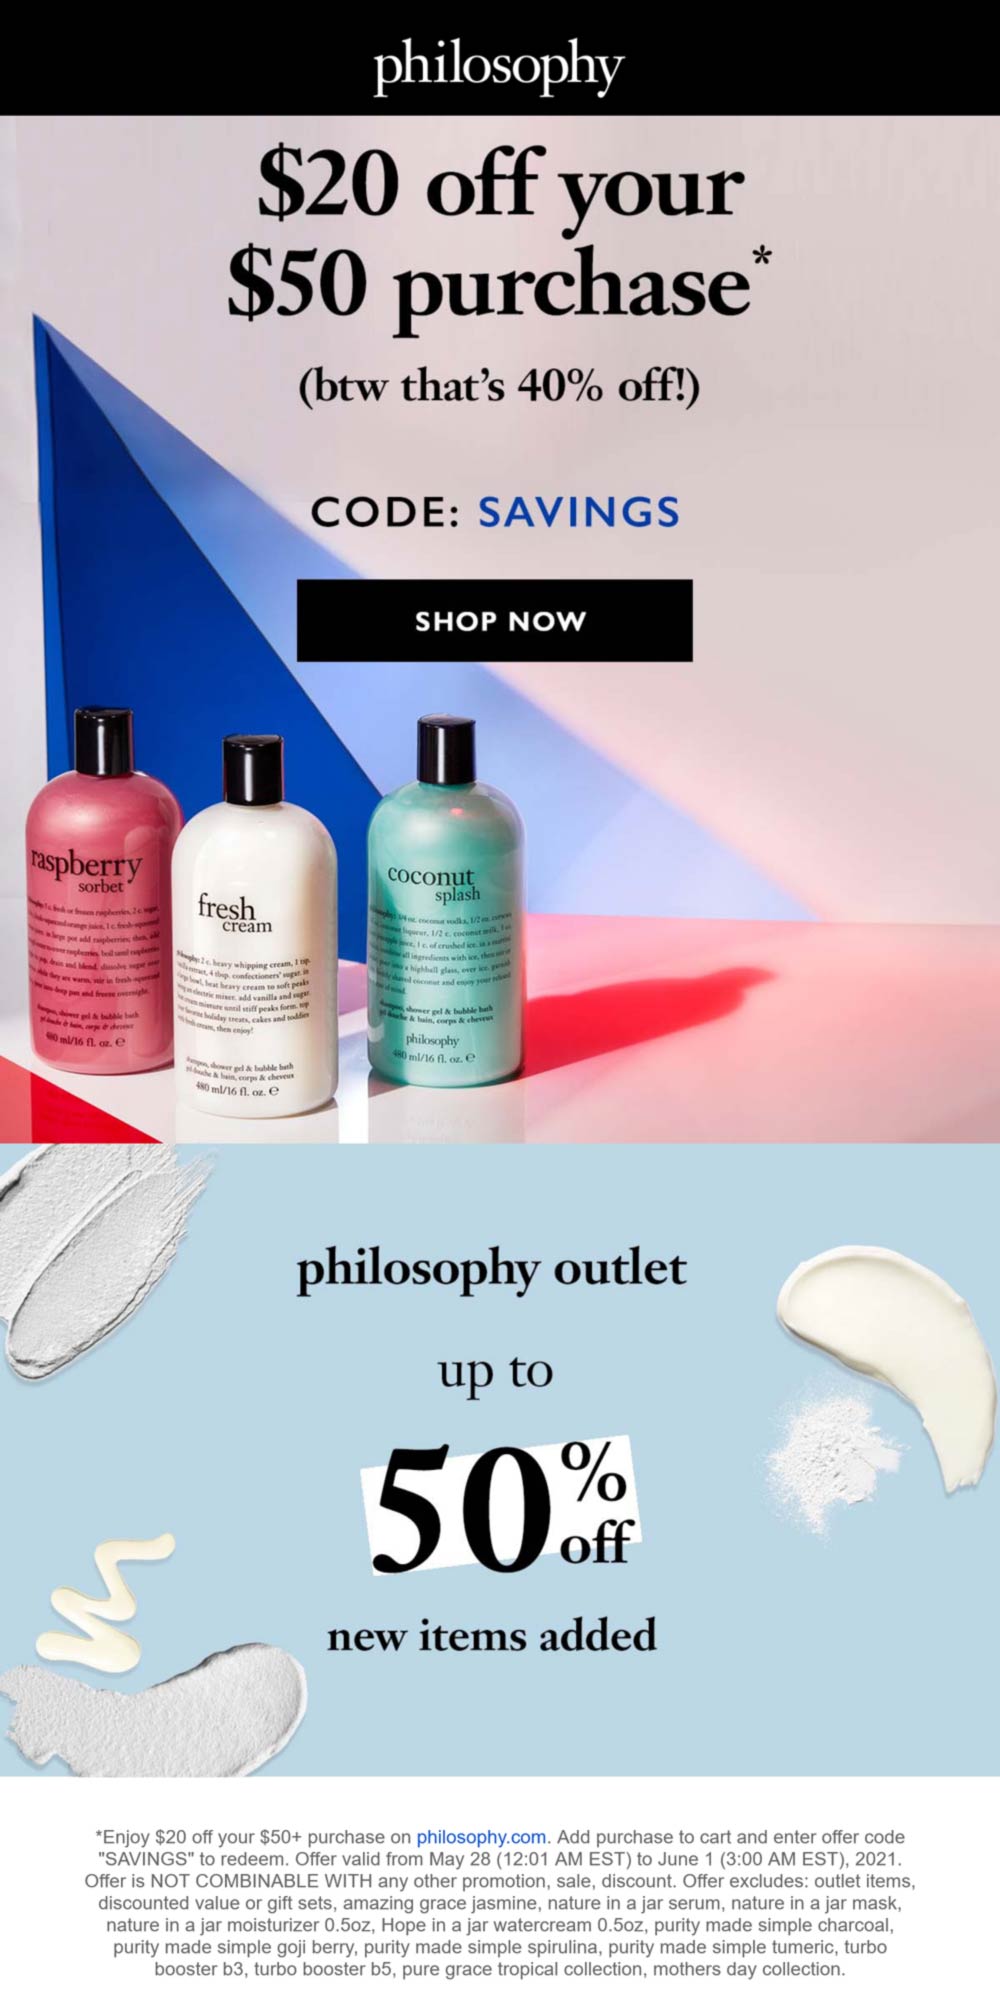 Philosophy stores Coupon  $20 off $50 at Philosophy via promo code SAVINGS #philosophy 